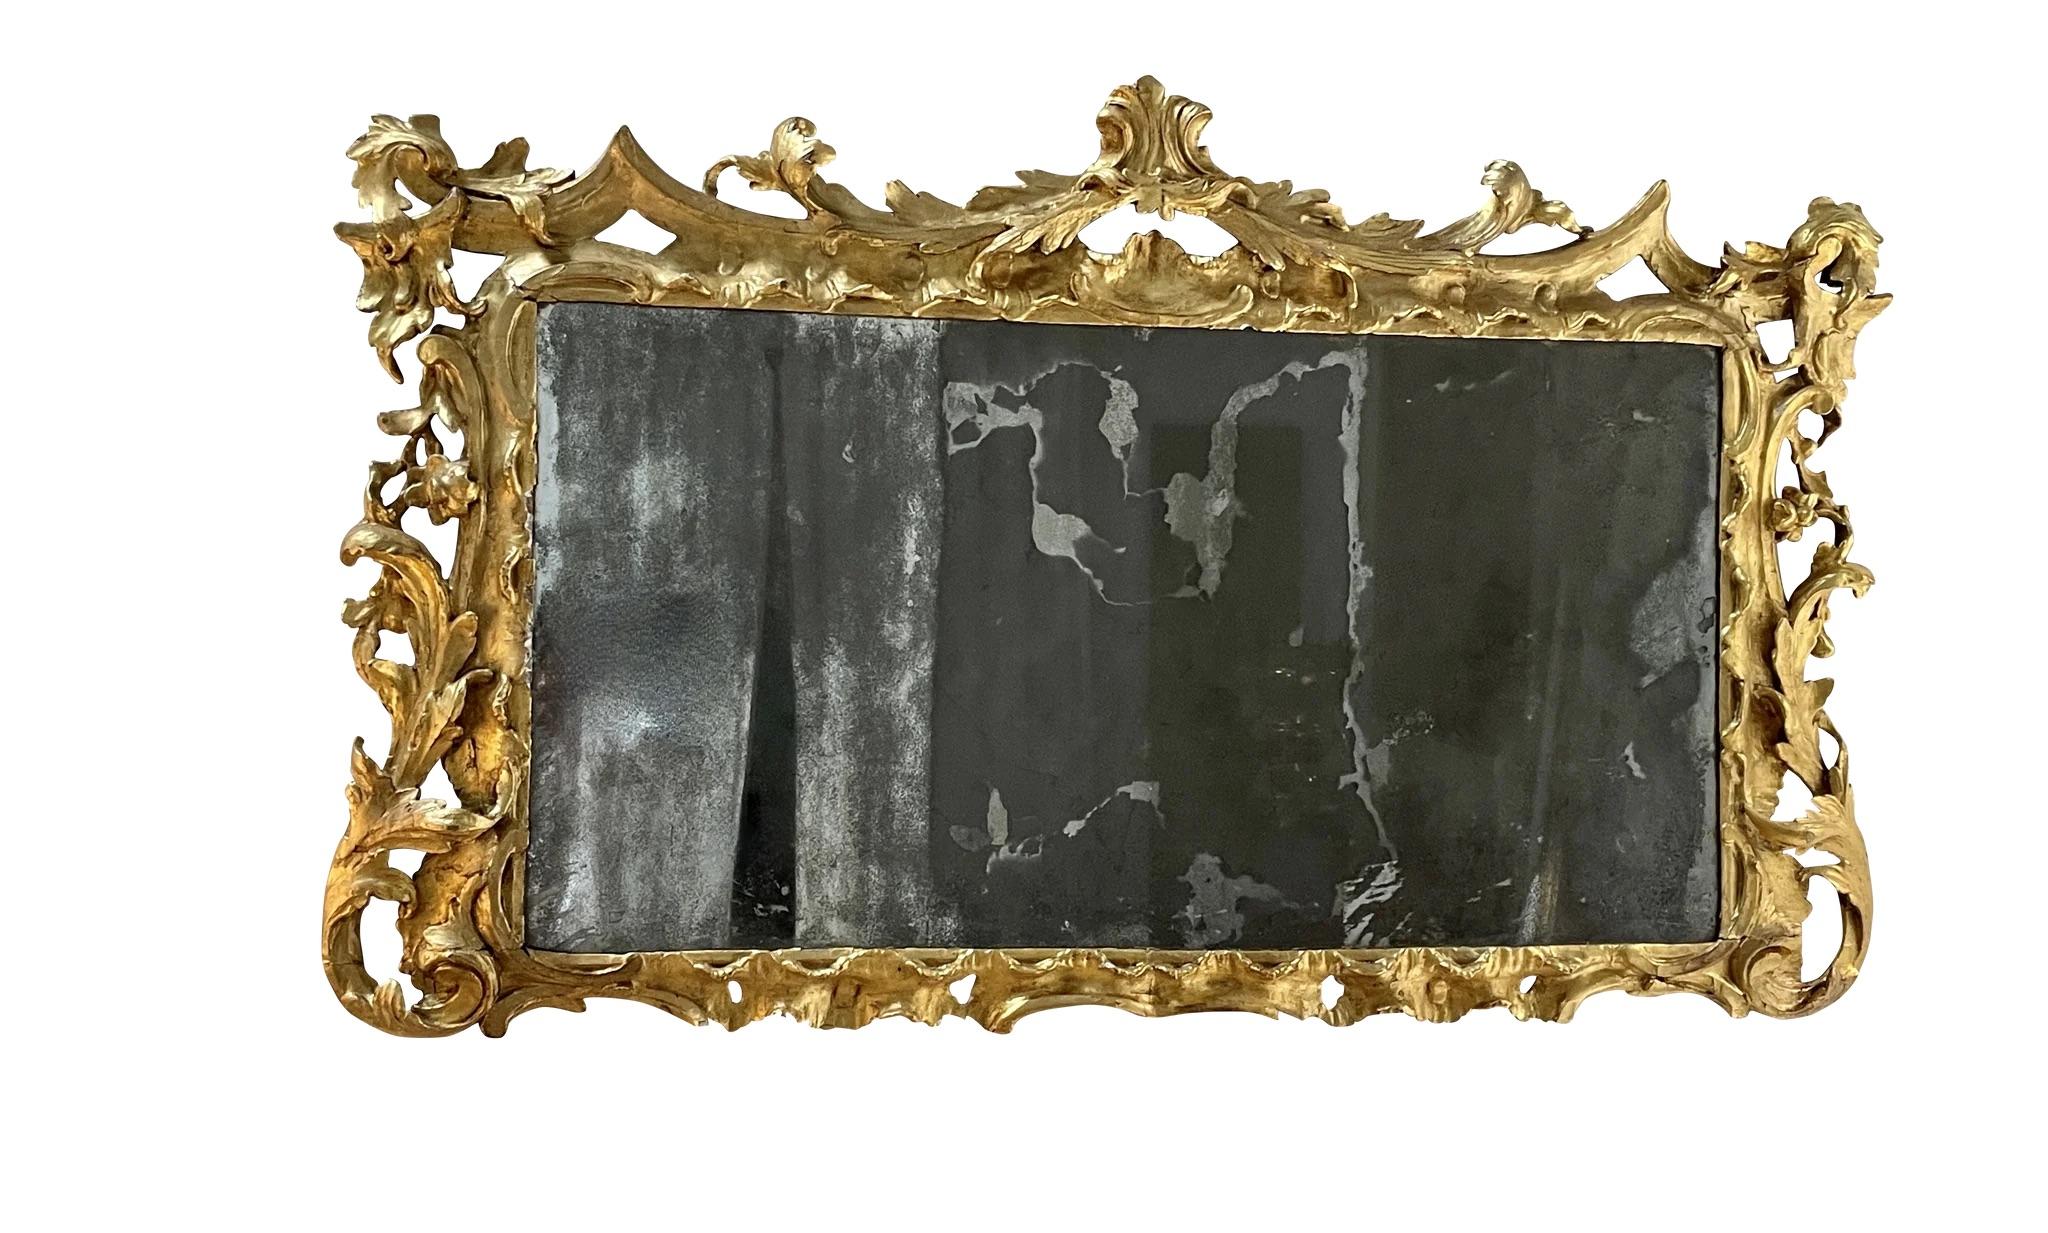 Italian Eighteenth Century ornately carved wooden mirror, with gilded surface, ornate floral and acanthus leaf design, having an early mirror plate.,19 1/2